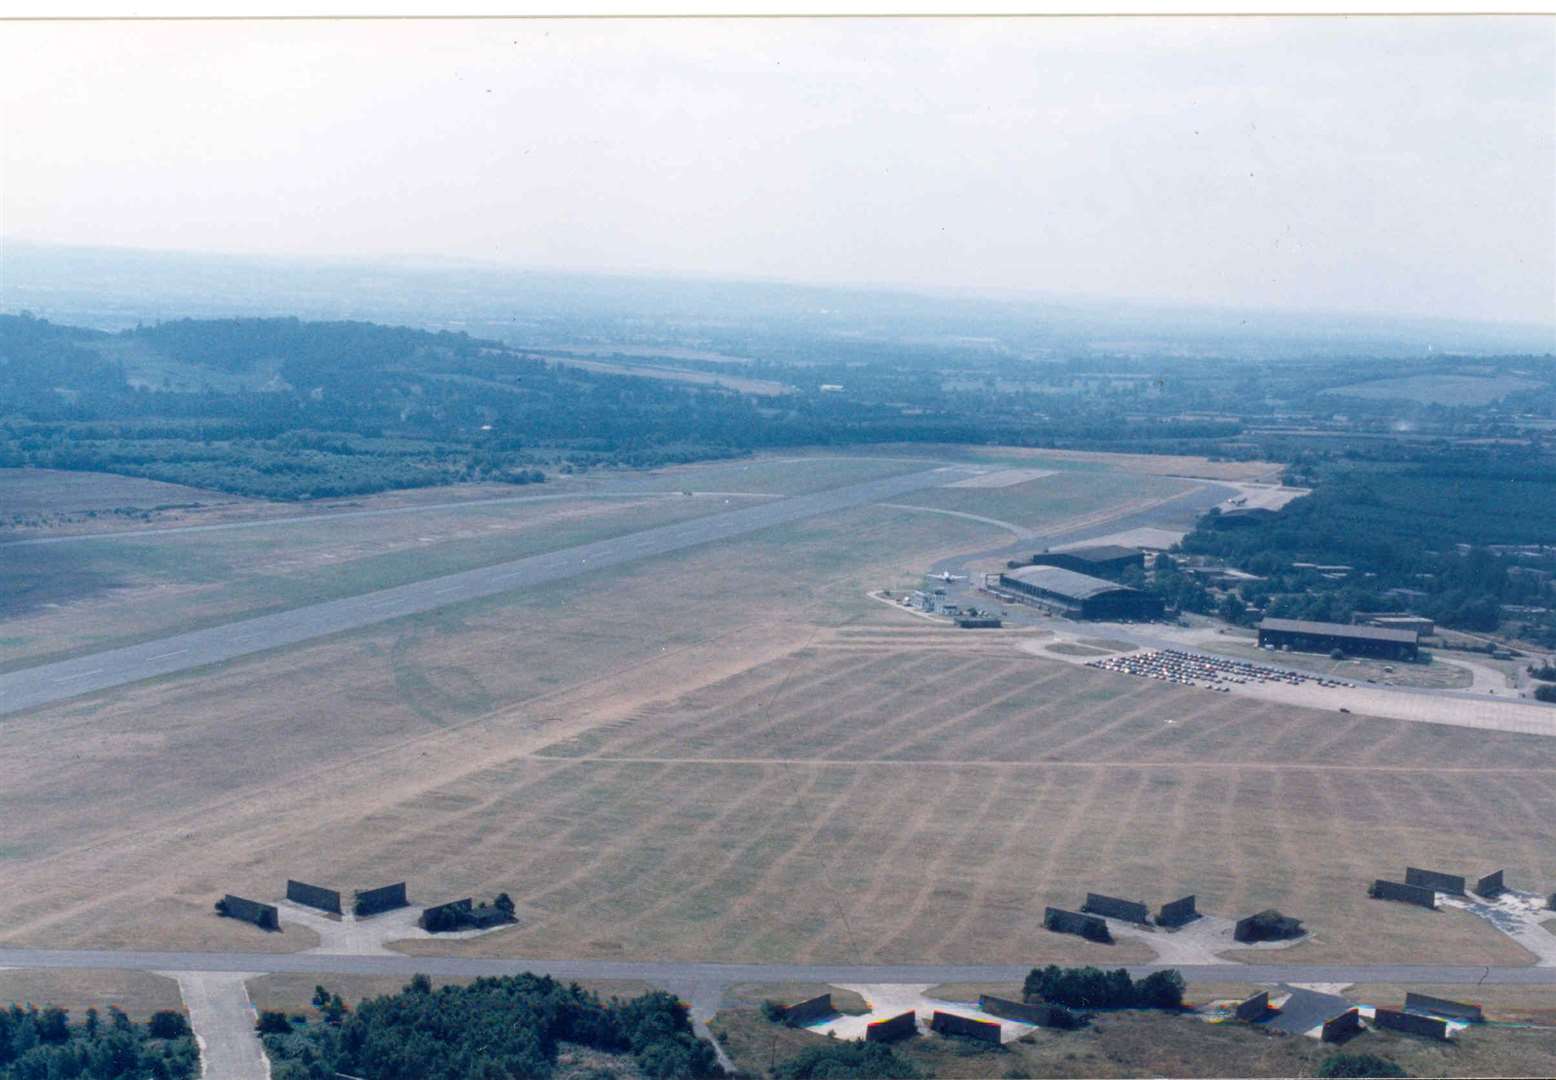 West Malling Airfield in 1990